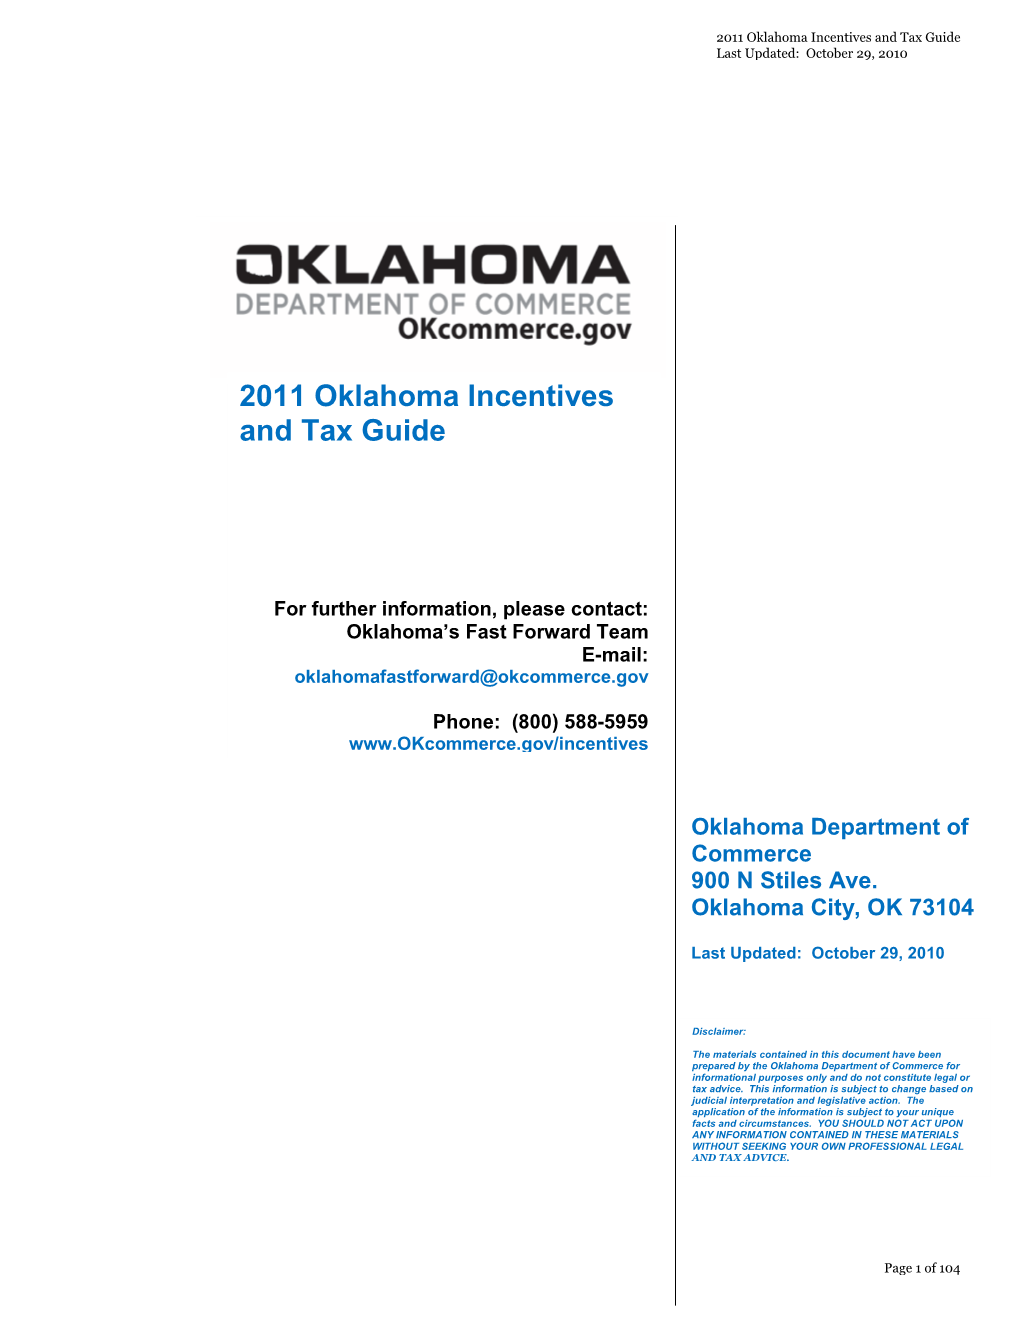 2011 Oklahoma Incentives and Tax Guide Last Updated: October 29, 2010